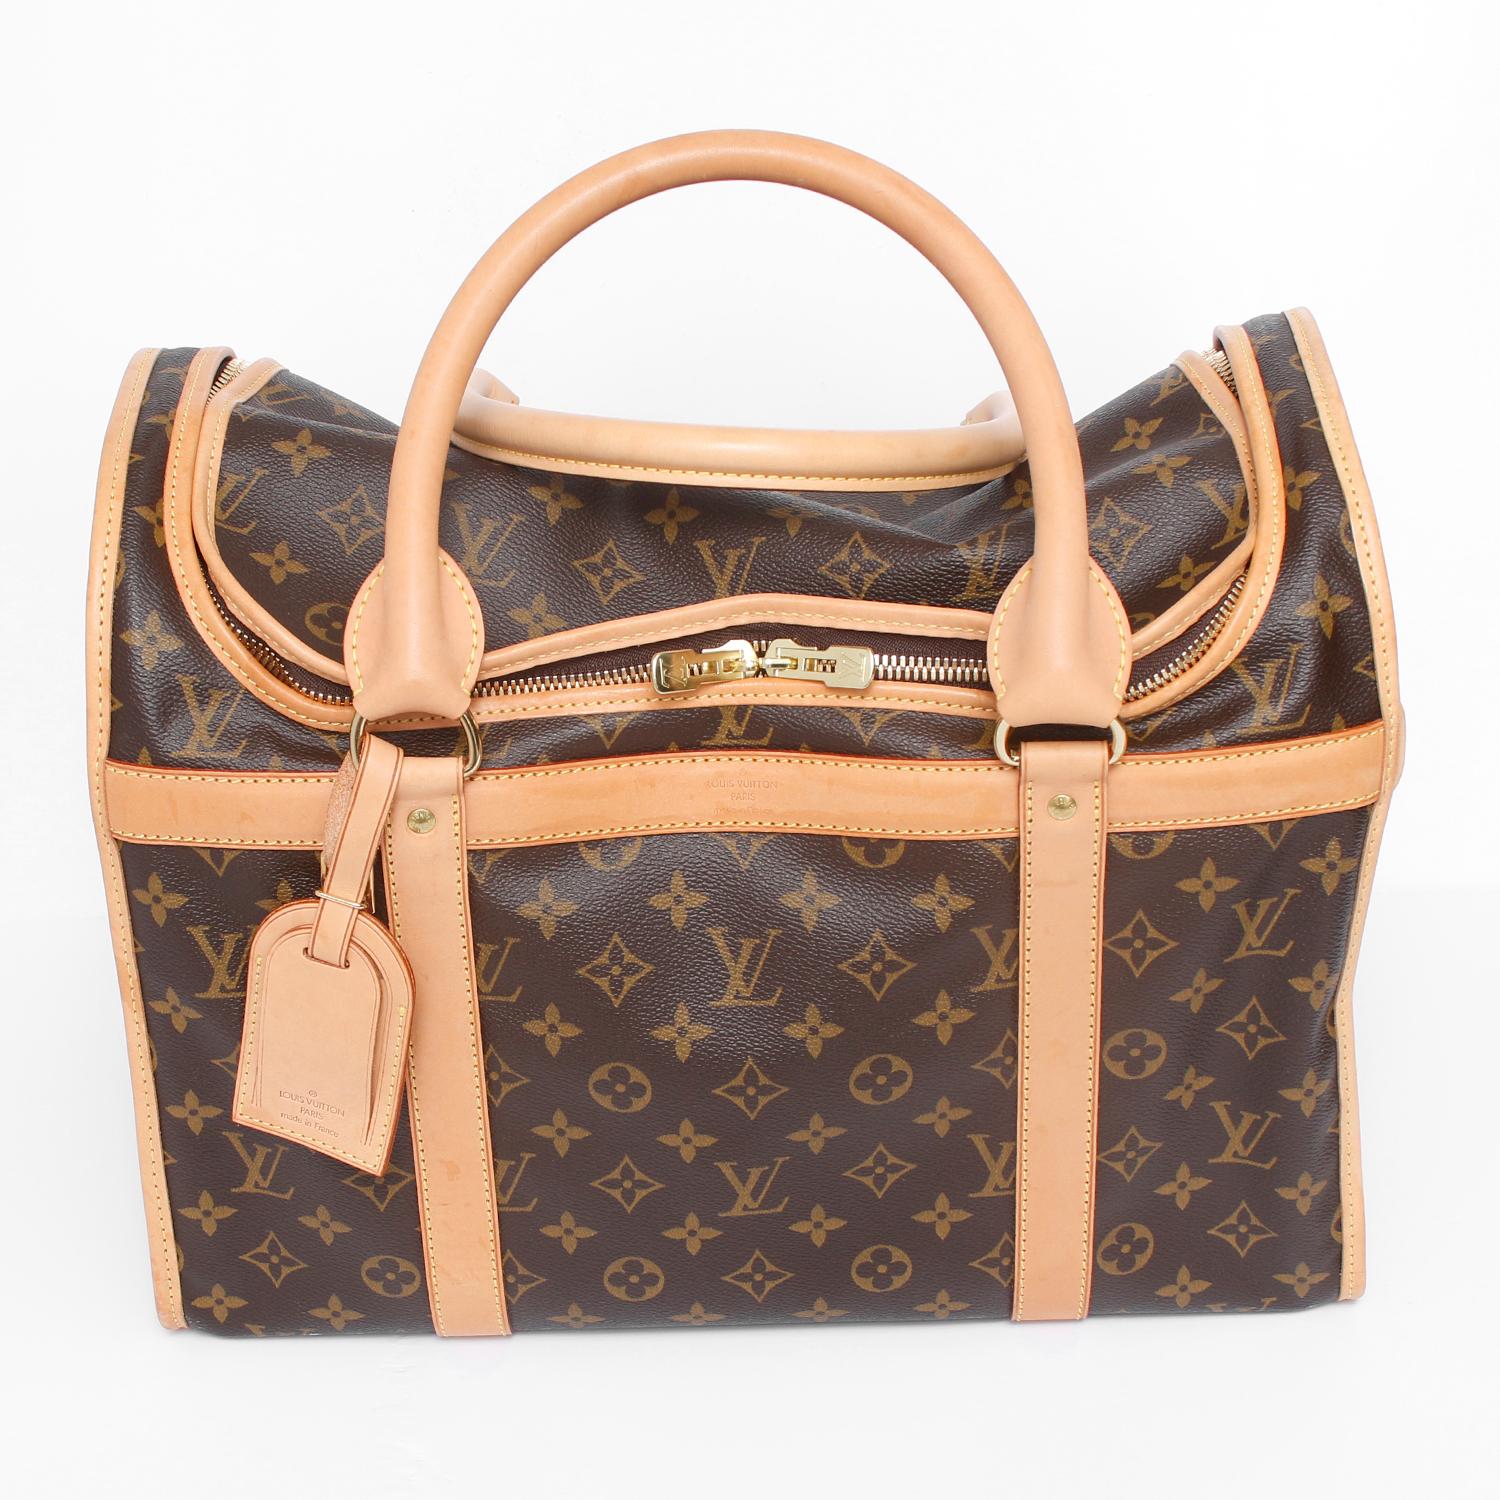 Louis Vuitton Dog Carrier 40  - This carrier in Monogram canvas is adapted to small dogs and particularly resistant to water and scratches. It is equipped with a breathable mesh window and zip-around closure. CURRENT RETAIL $2690

11.8 x 8.7 inches